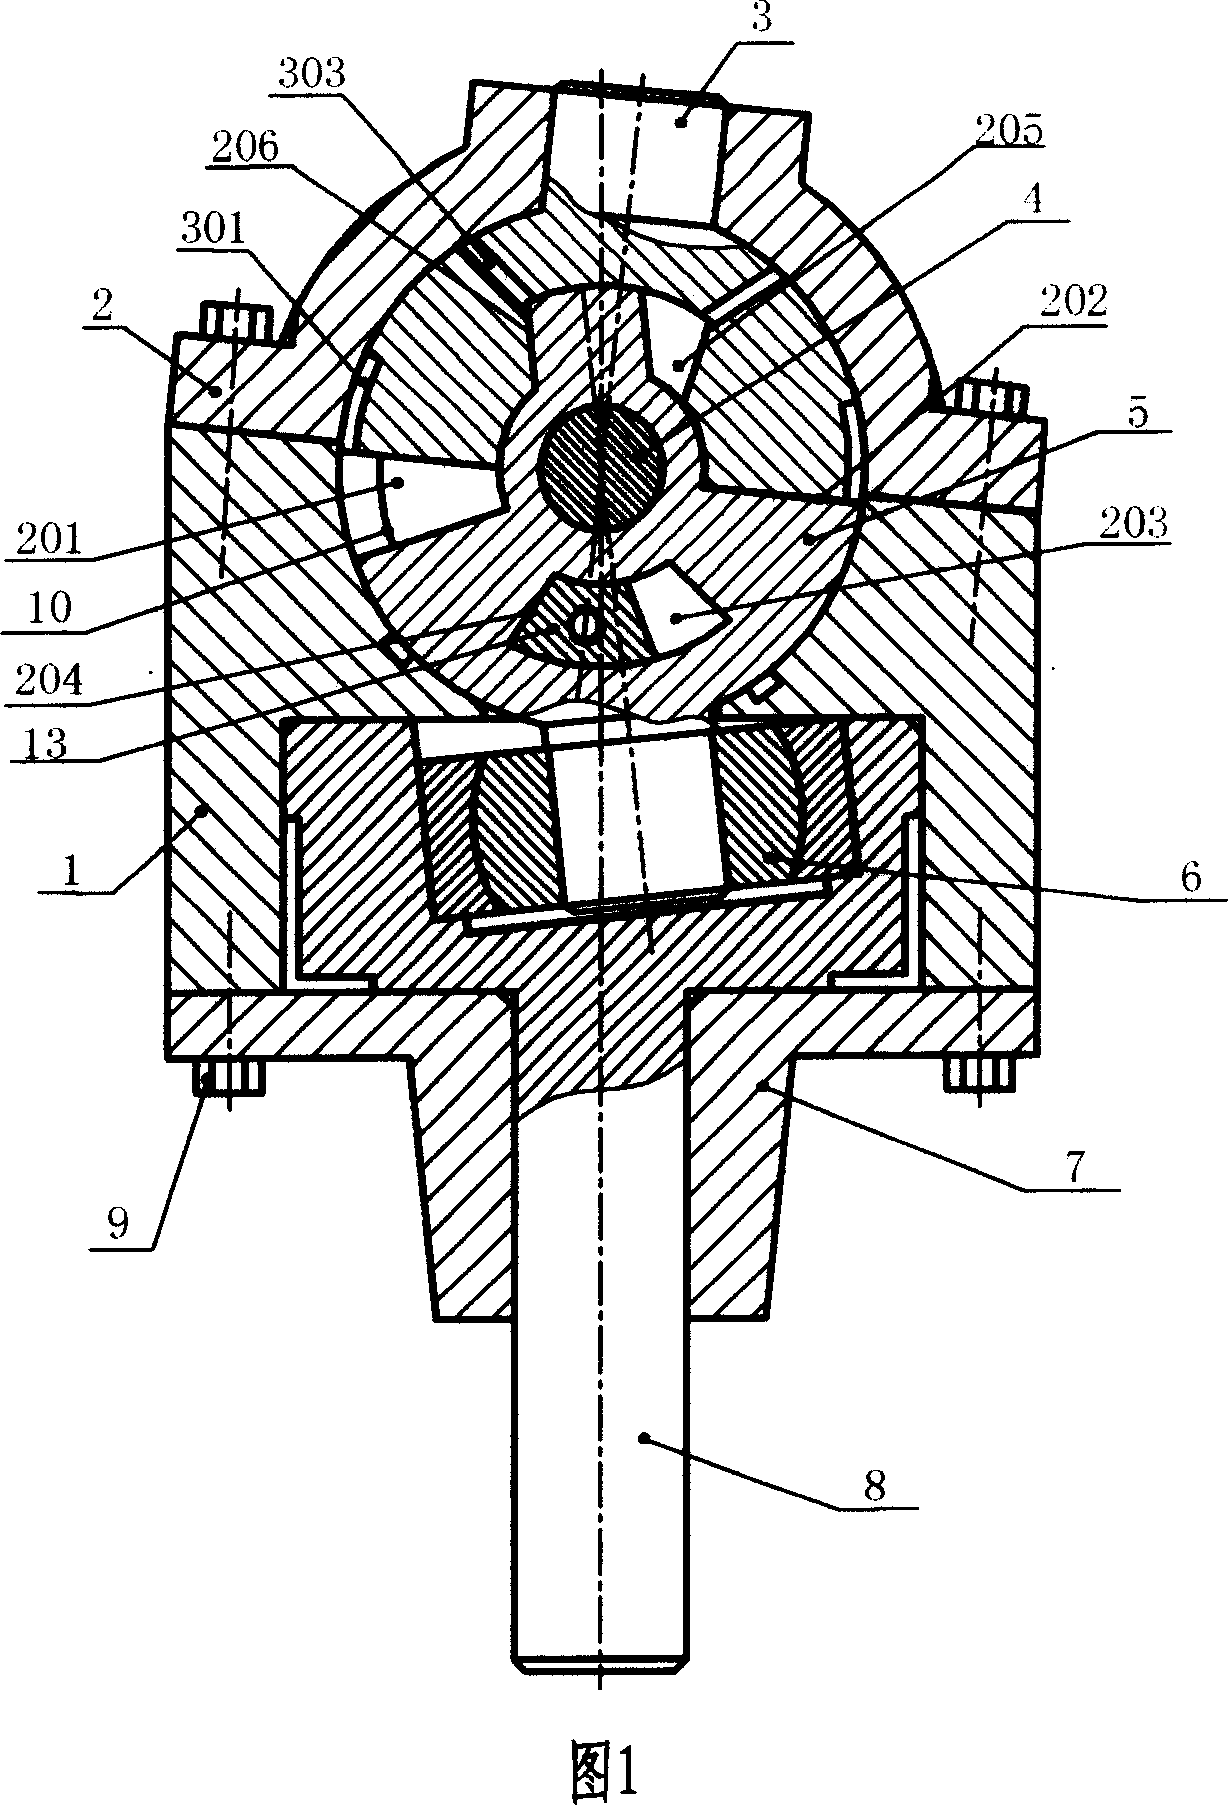 Ball-shape compressor and expansion compressor capable of realizing multi-stage compression